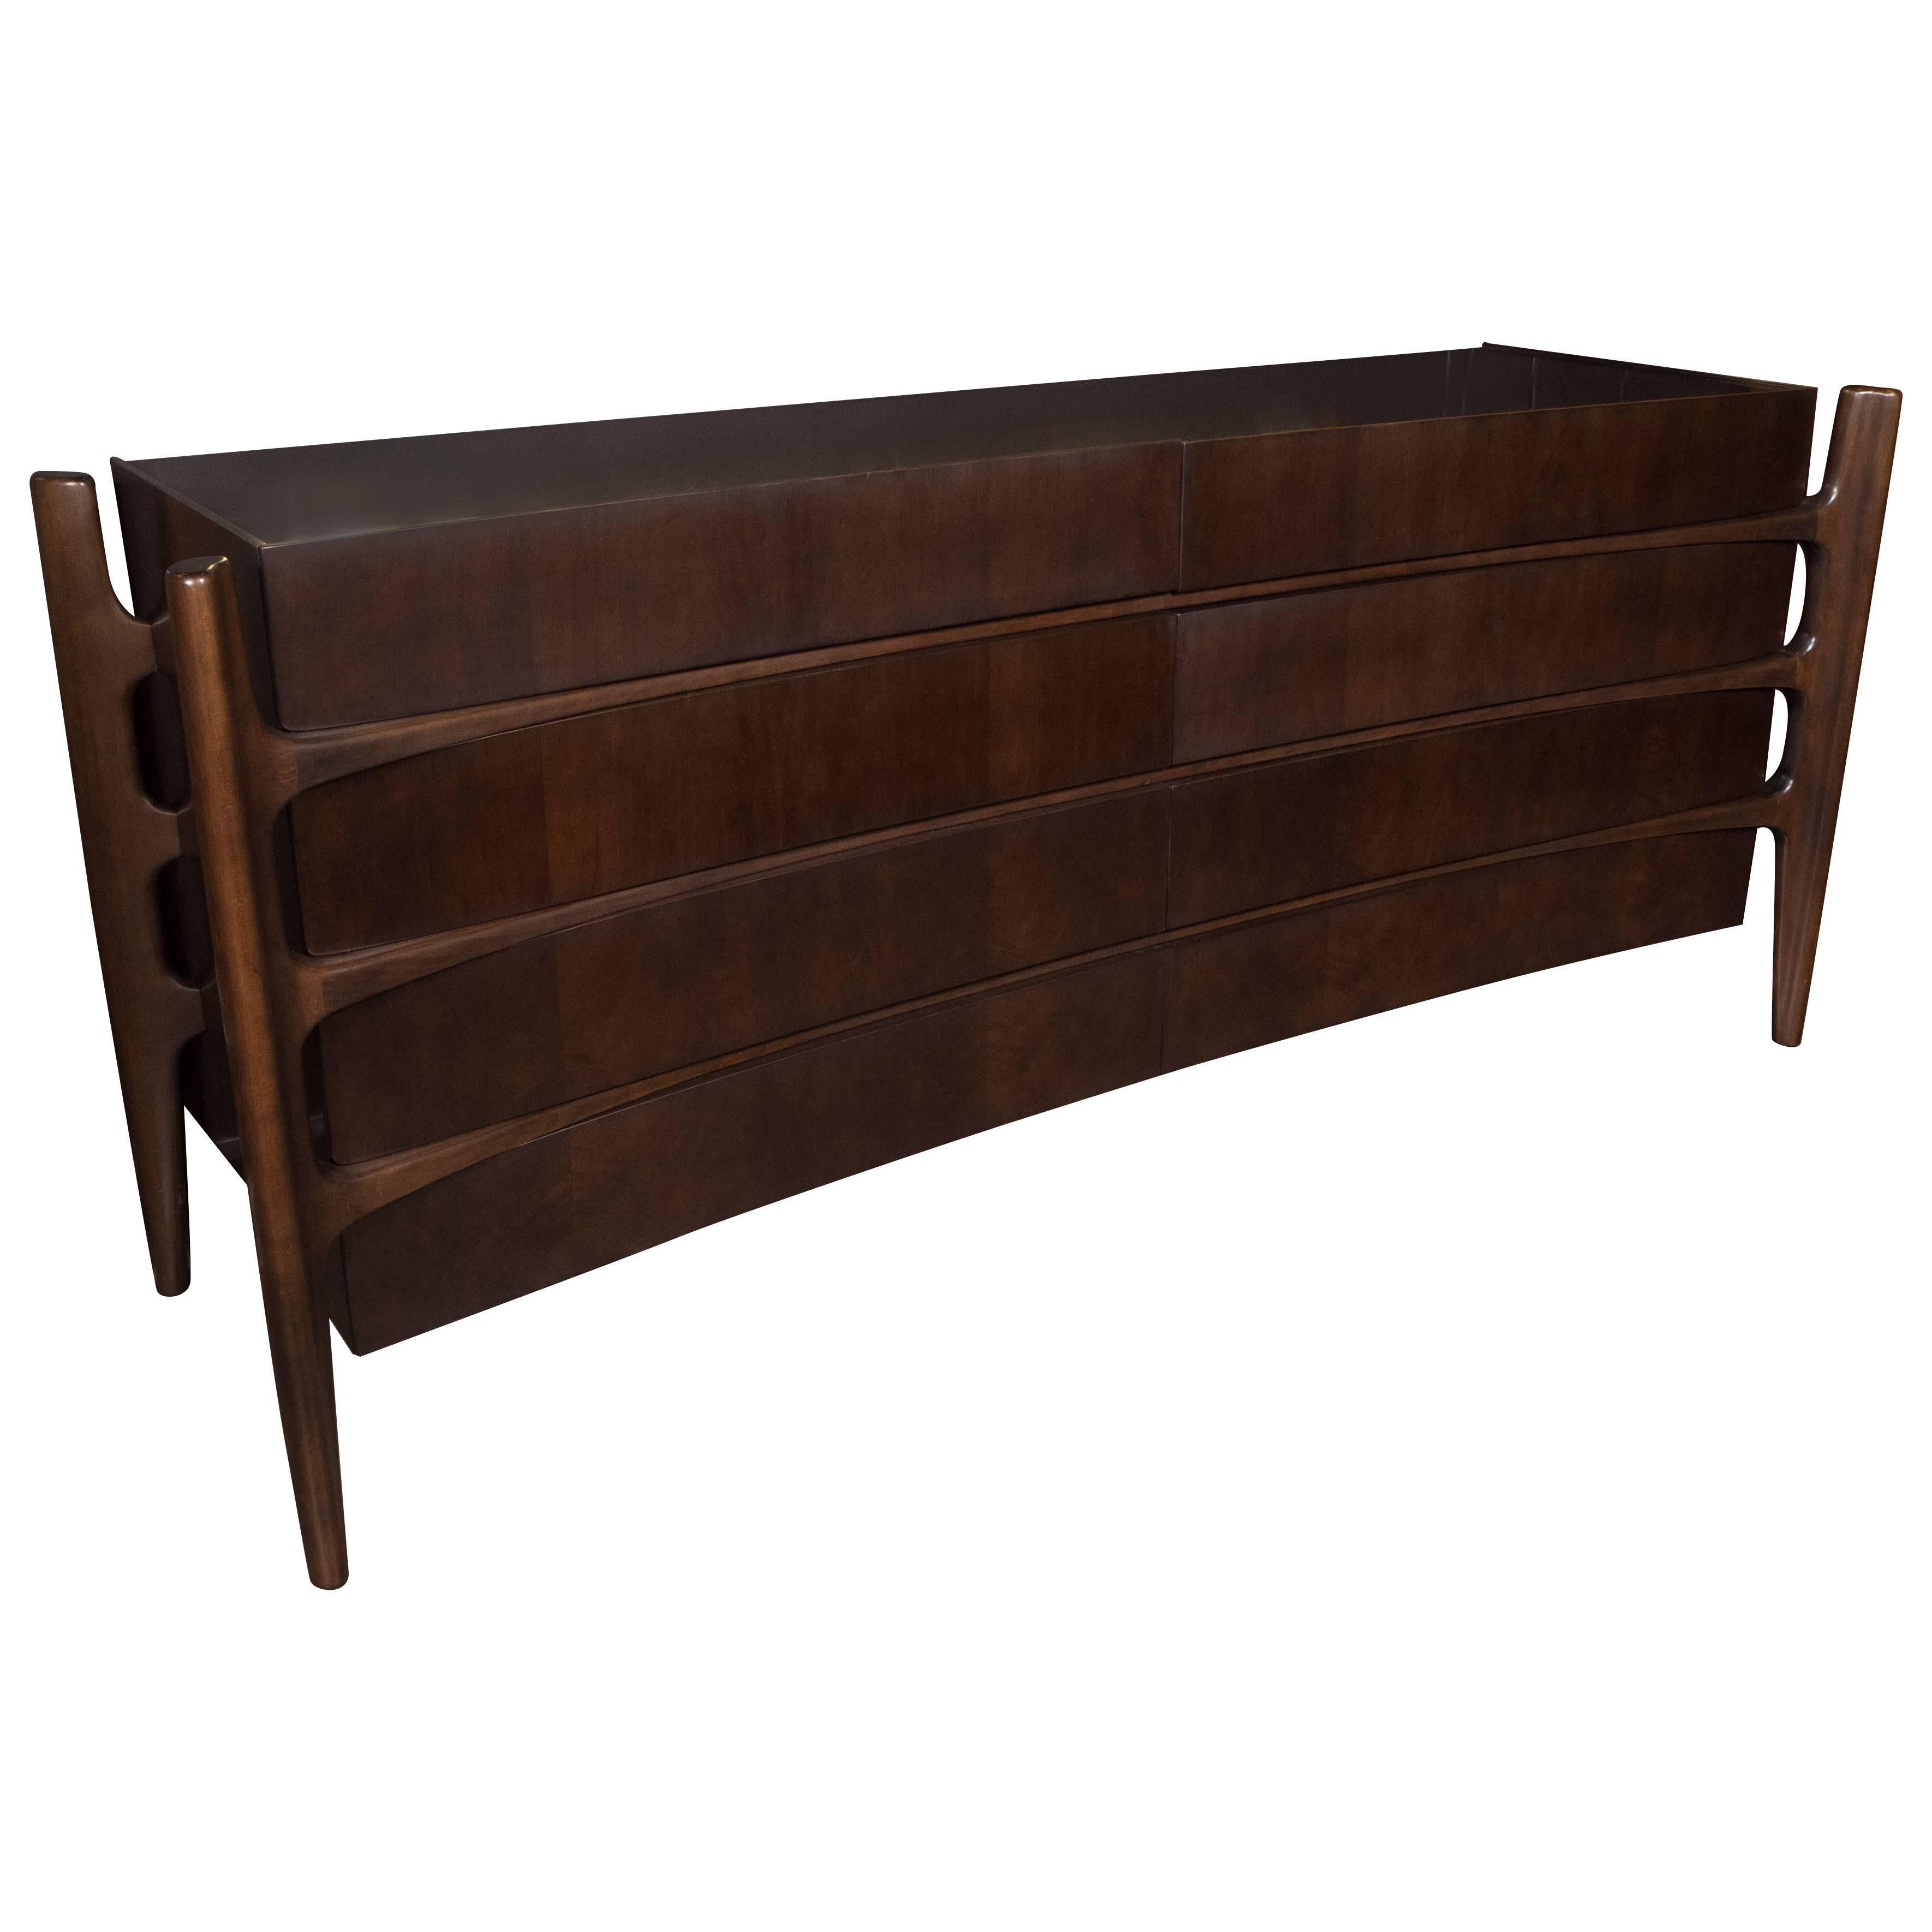 The celebrated Mid-Century Modern Swedish designer William Hinn realized this exceptional and rare eight-drawer walnut dresser, circa 1950. It features four splines, detached from the body of the cabinet, that descend into tapered legs. The splines